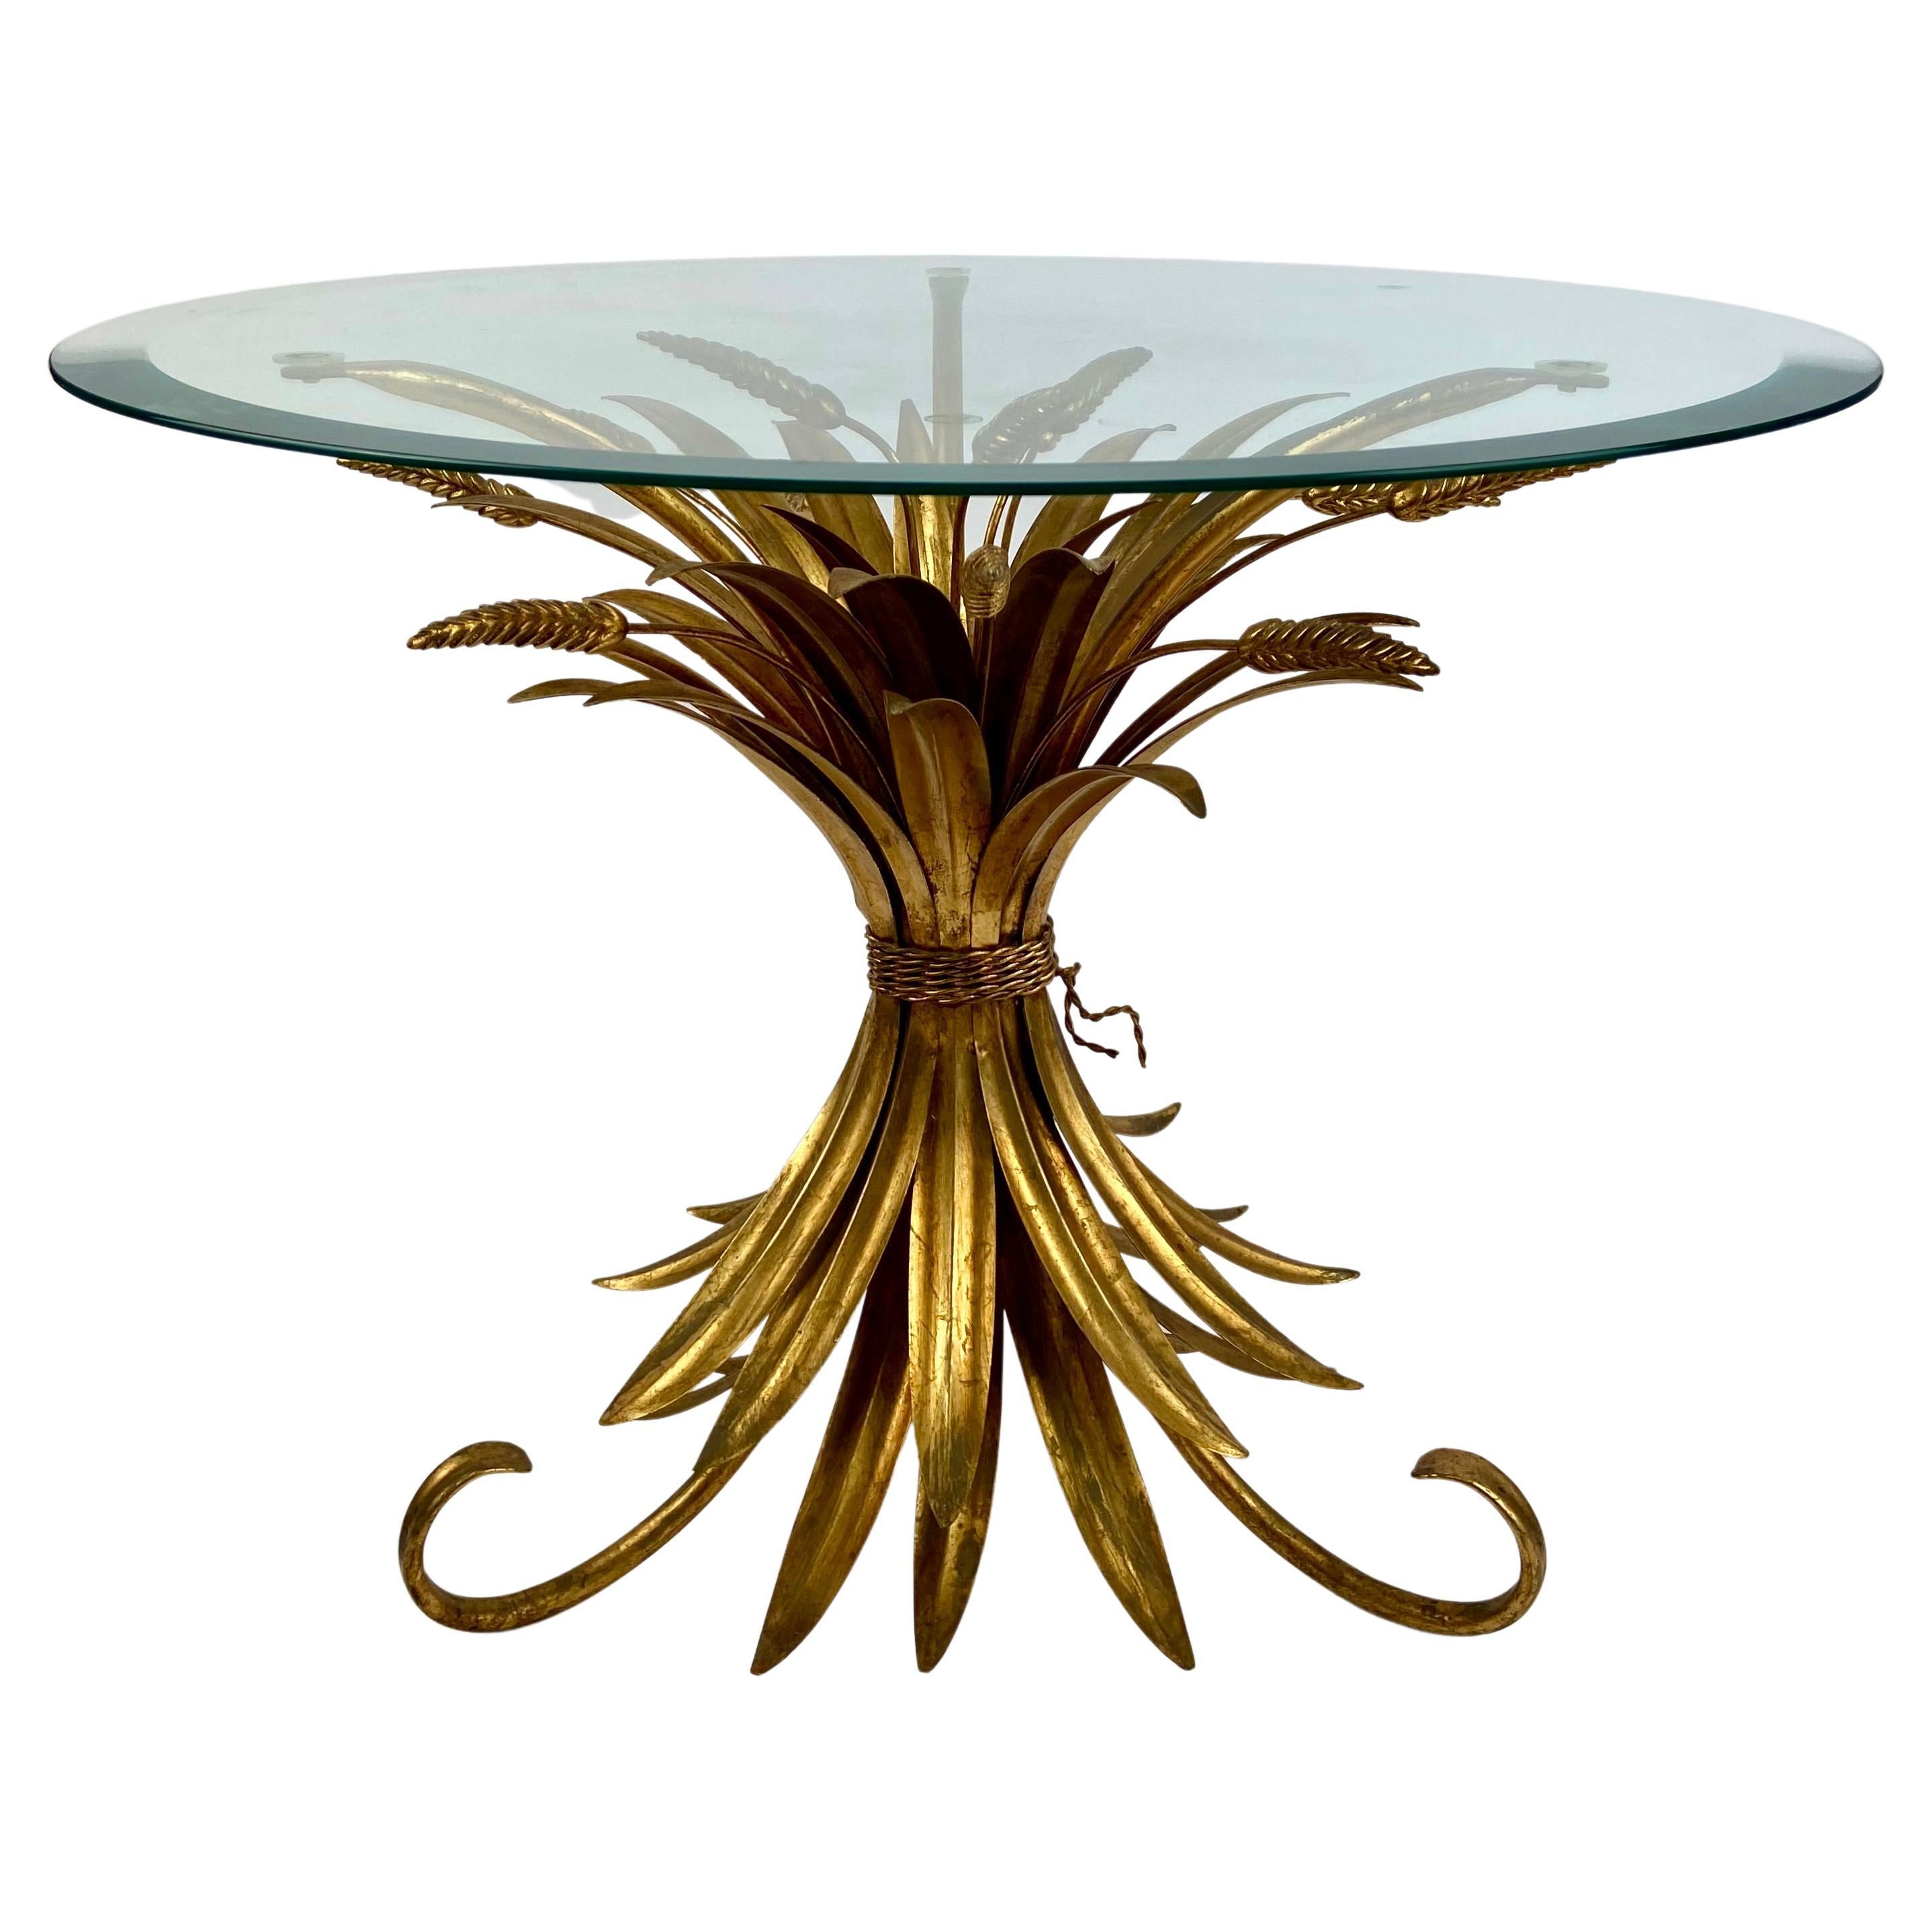 Coco Chanel Wheat Sheaf Table / Weizentisch / 1960s Coffee Table in General